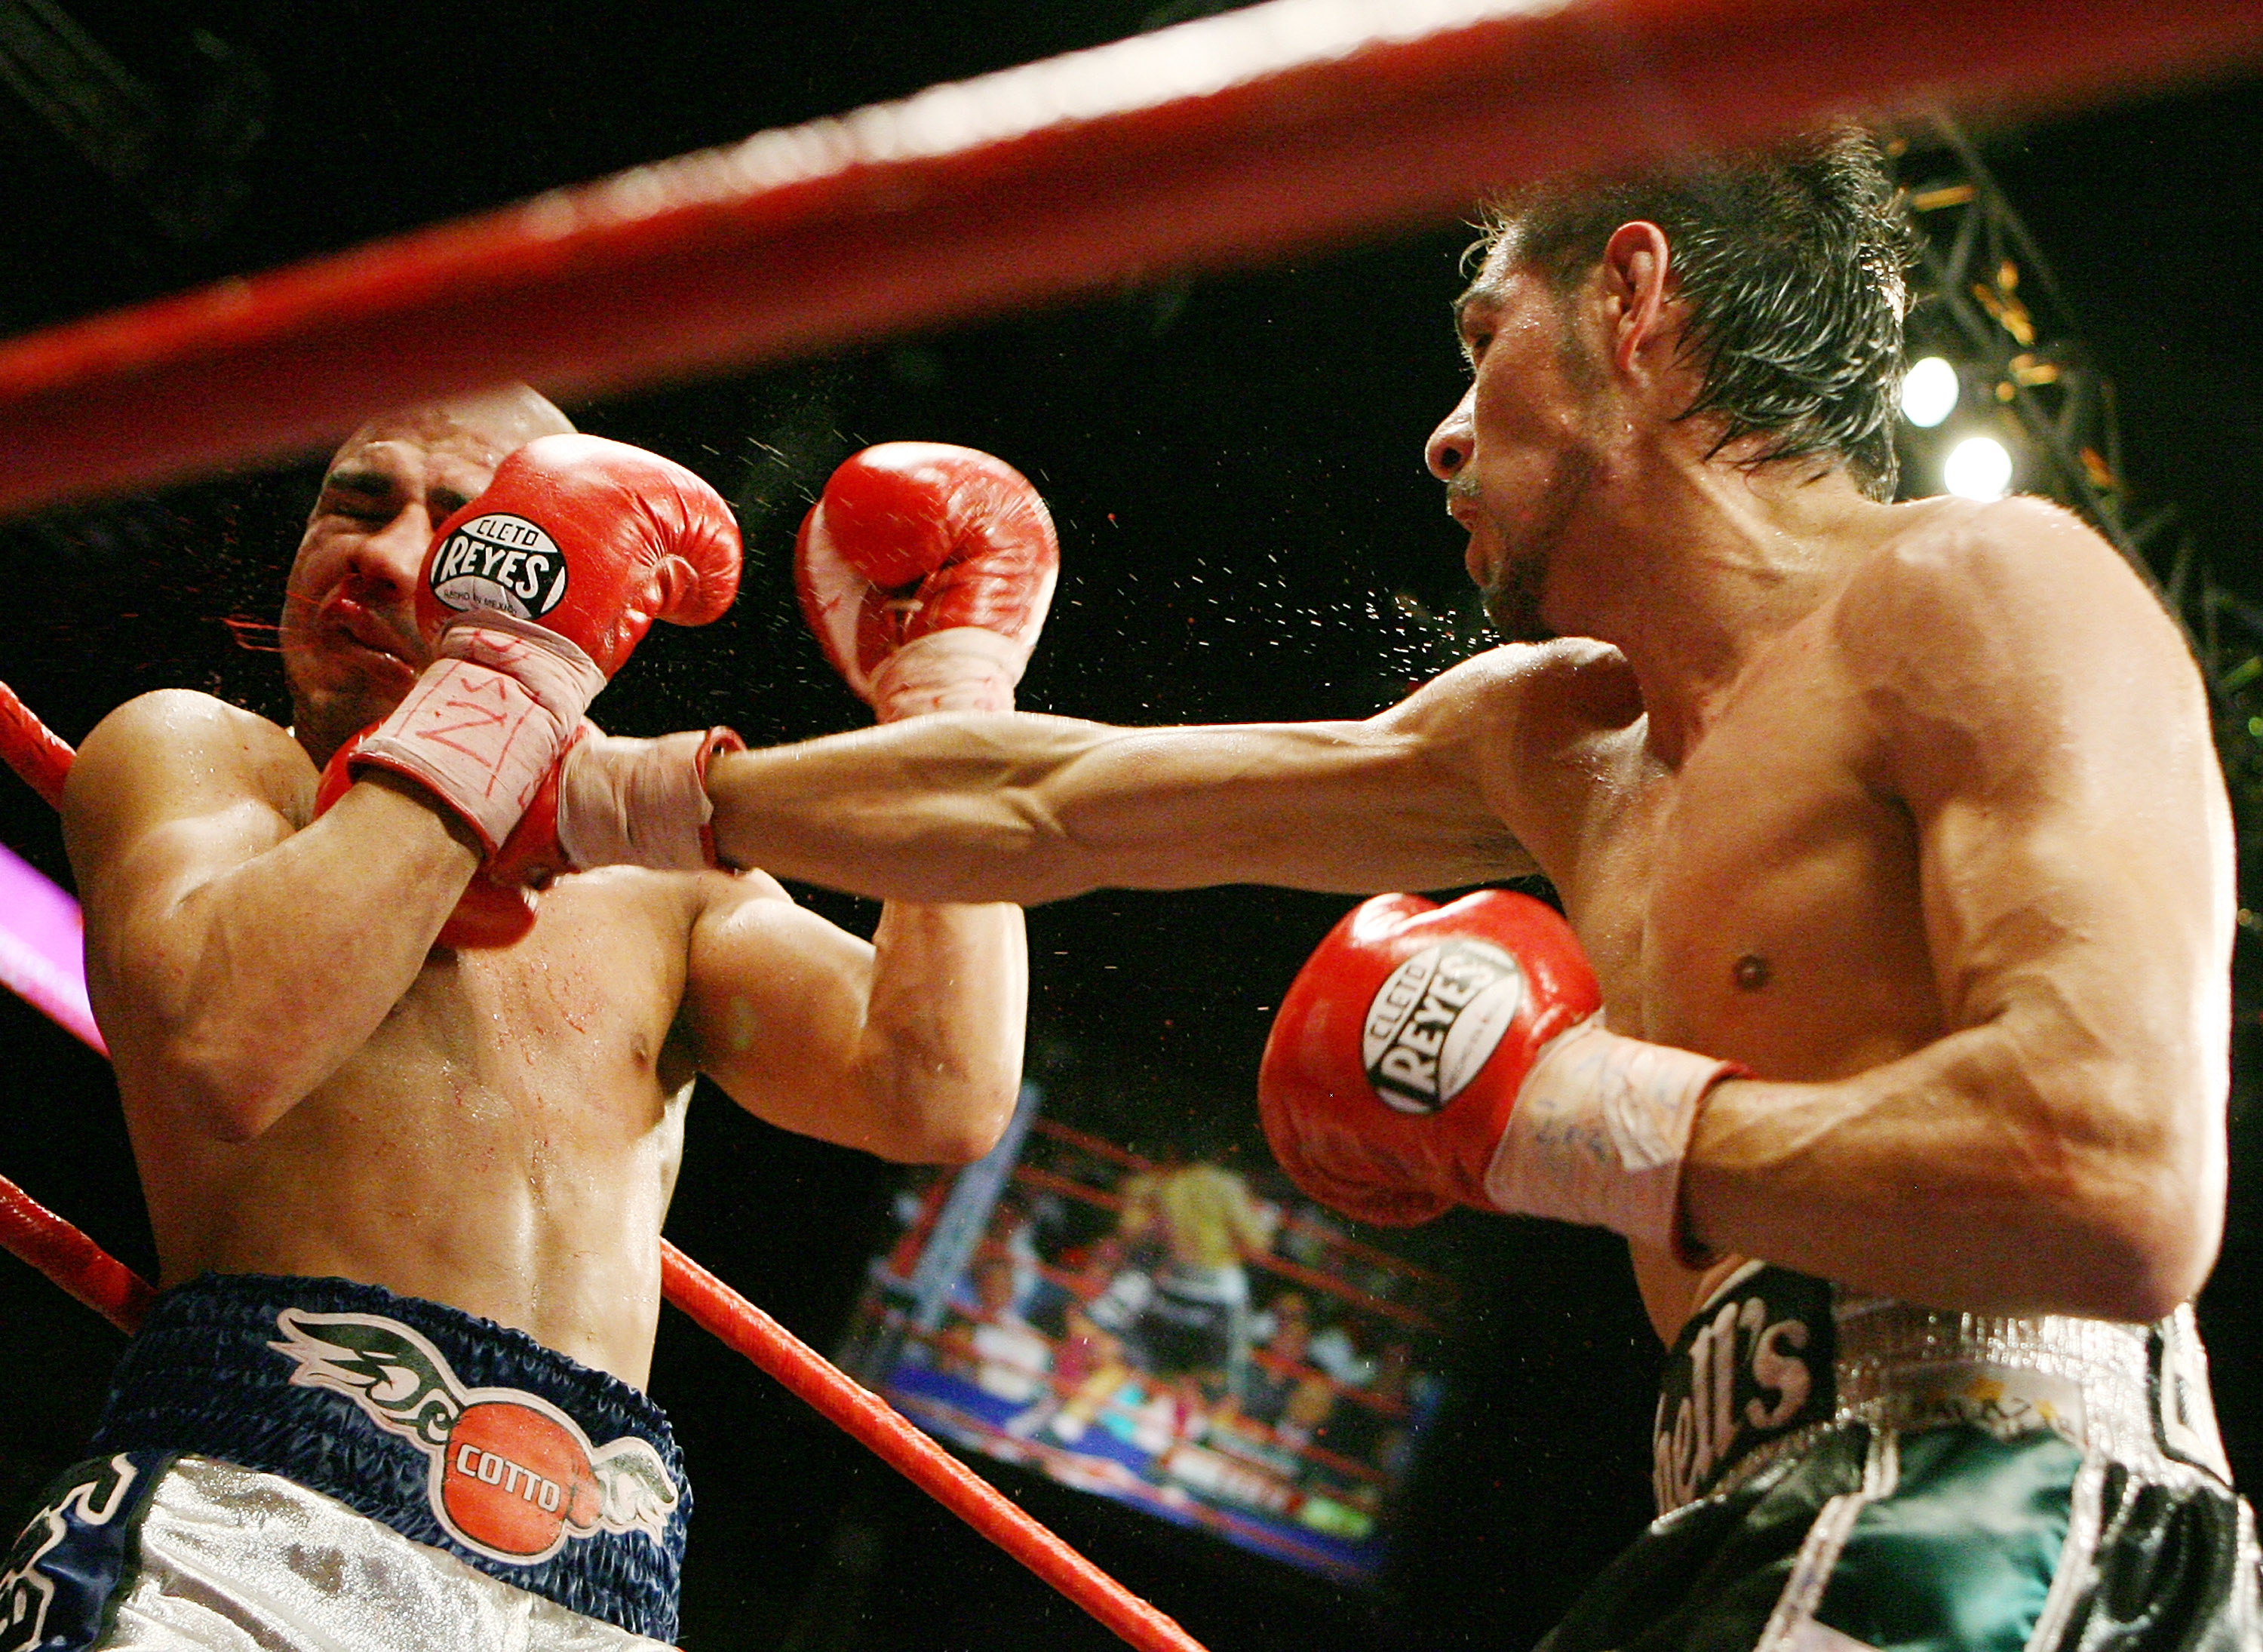 LAS VEGAS - JULY 26:  Antonio Margarito (R) hits Miguel Cotto during their WBA welterweight title fight at the MGM Grand Garden Arena July 26, 2008 in Las Vegas, Nevada. Margarito won by TKO in the 11th round.  (Photo by Ethan Miller/Getty Images)